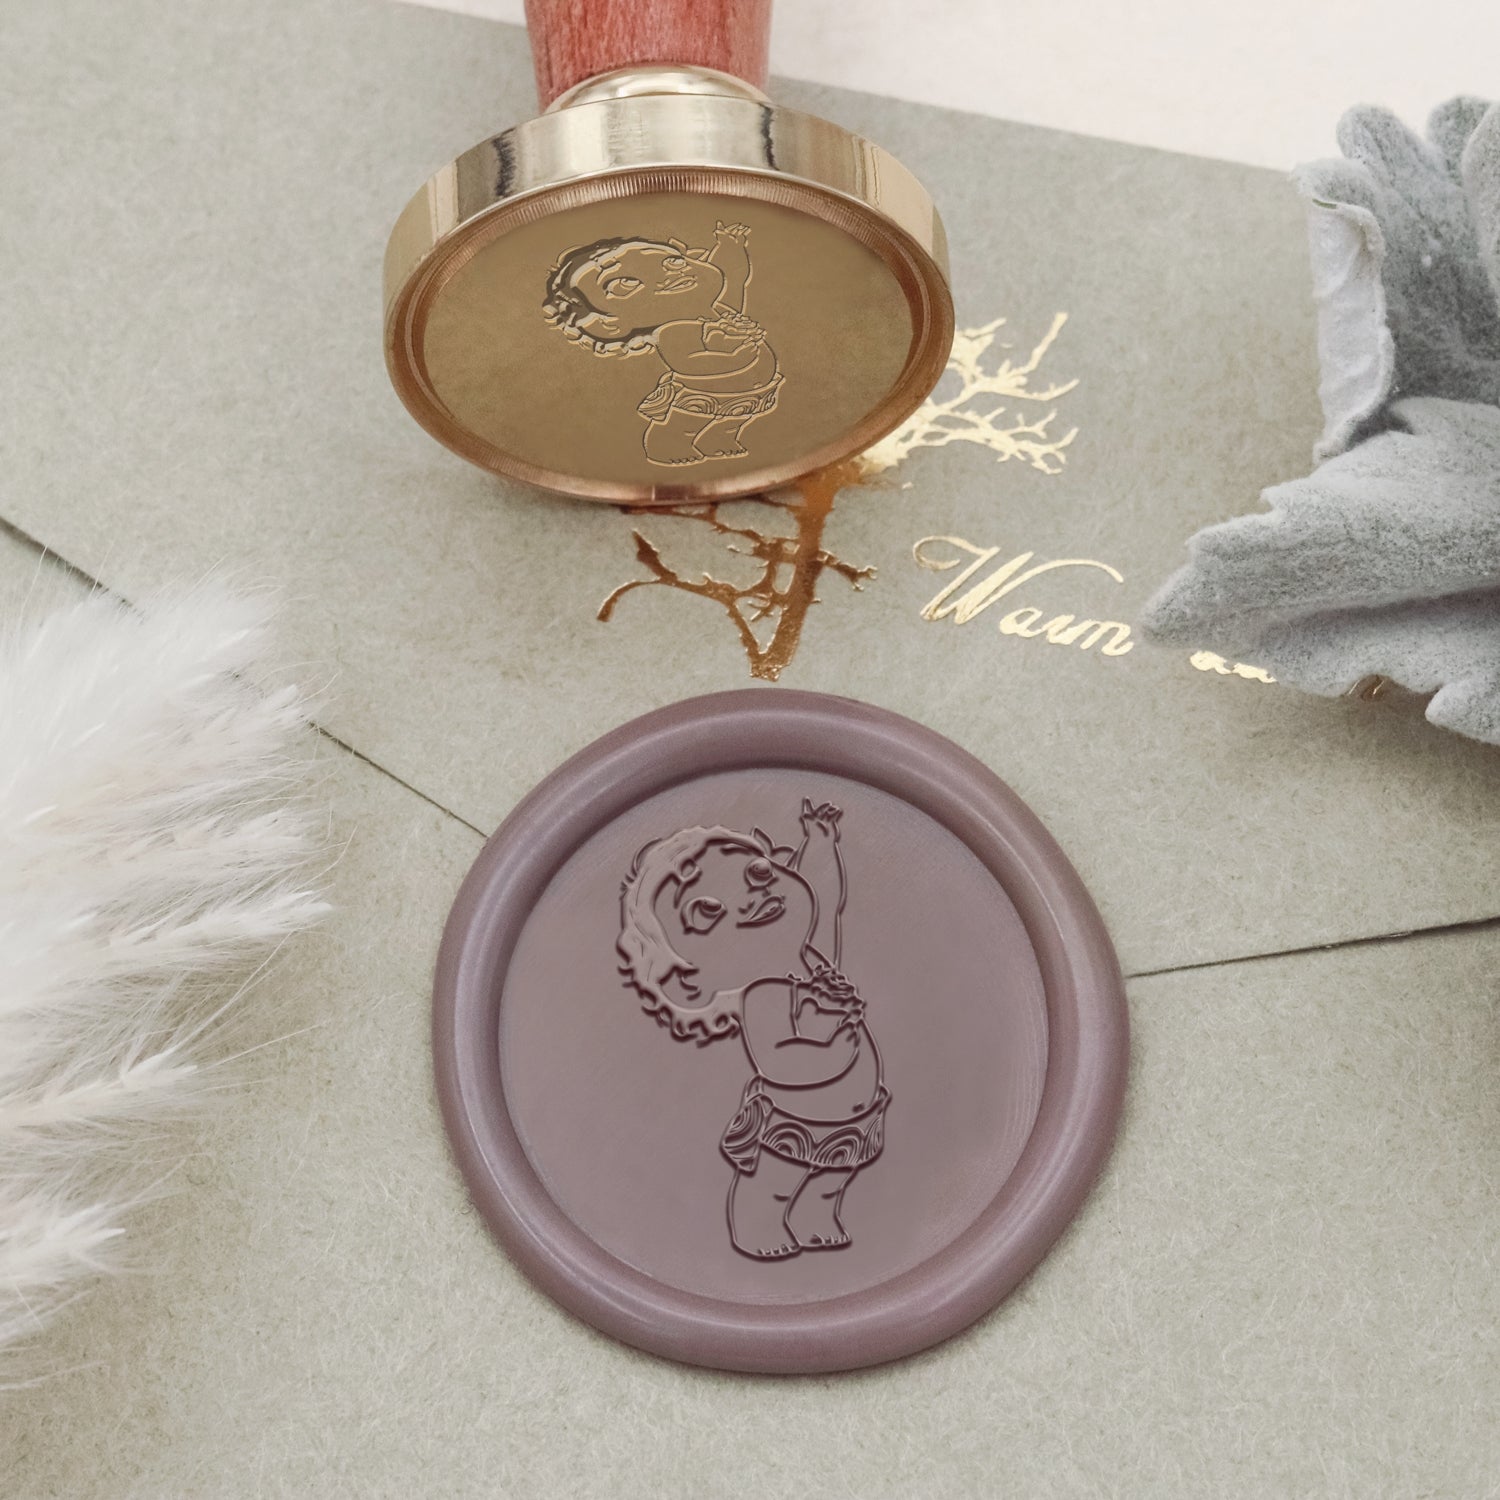 Animated Film Fairytale Character Wax Seal Stamp - 23 2